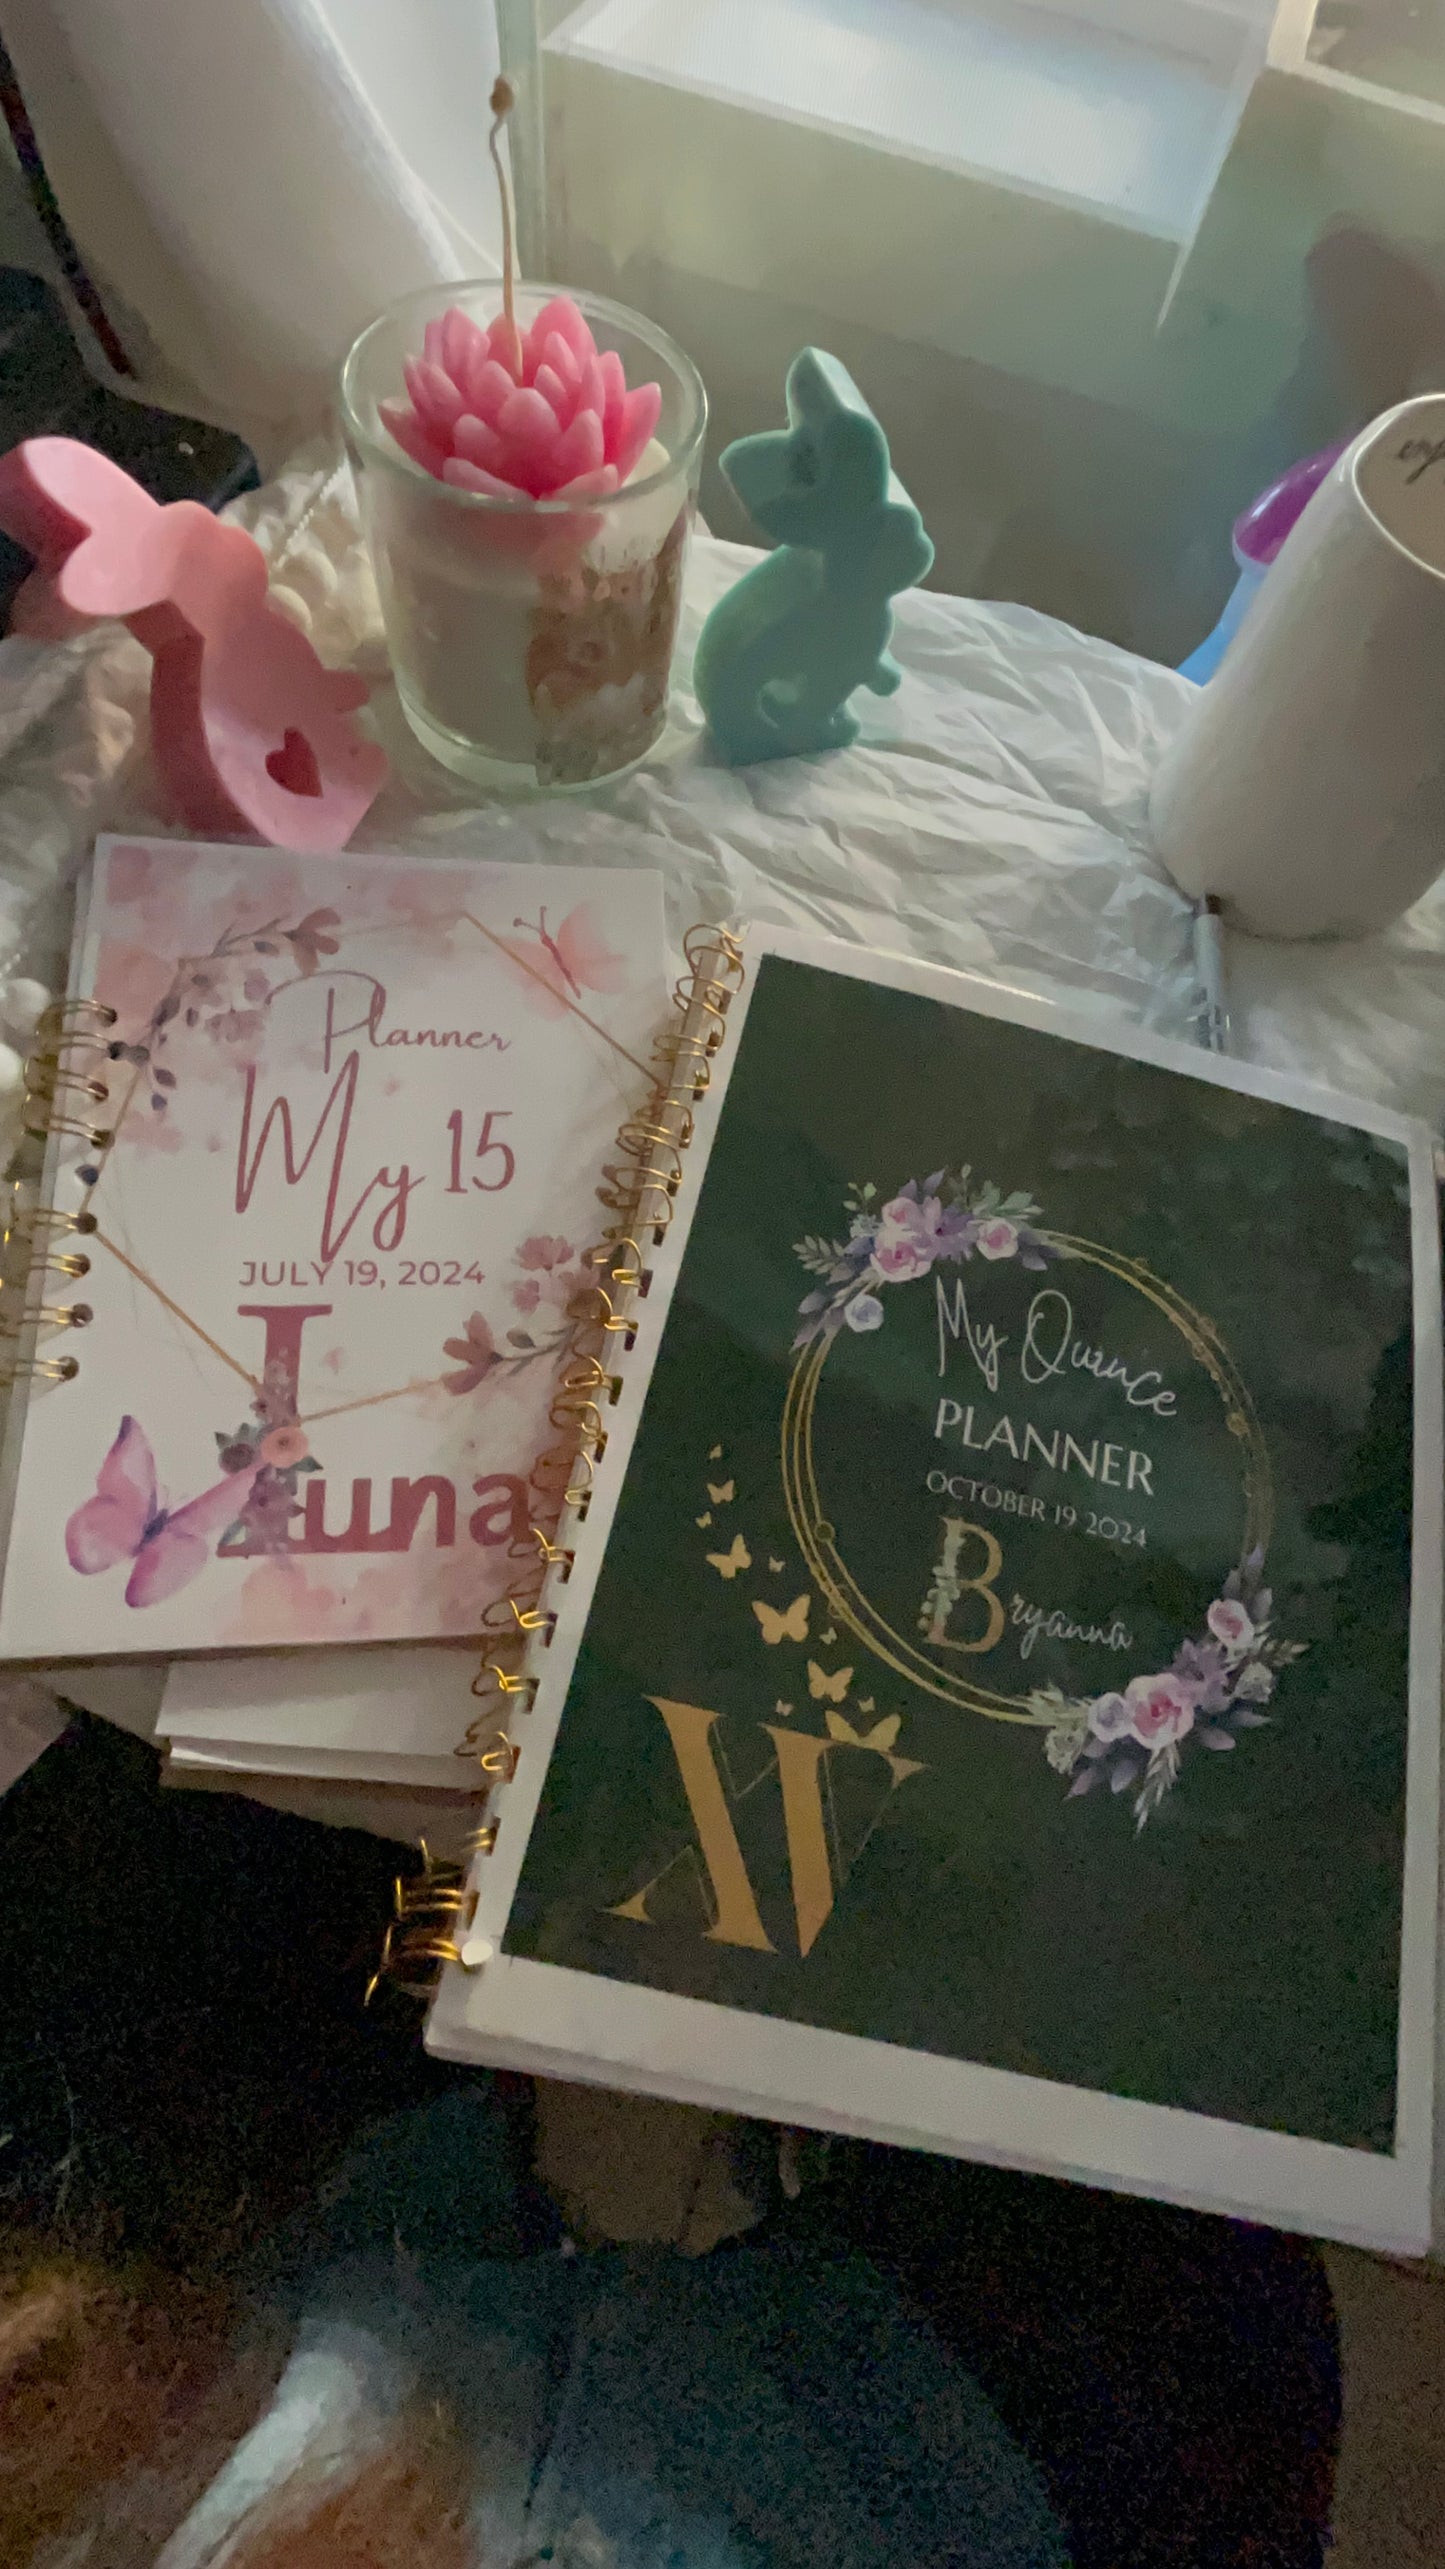 My 15 planner-Custom made planner for your quince-Quince planner